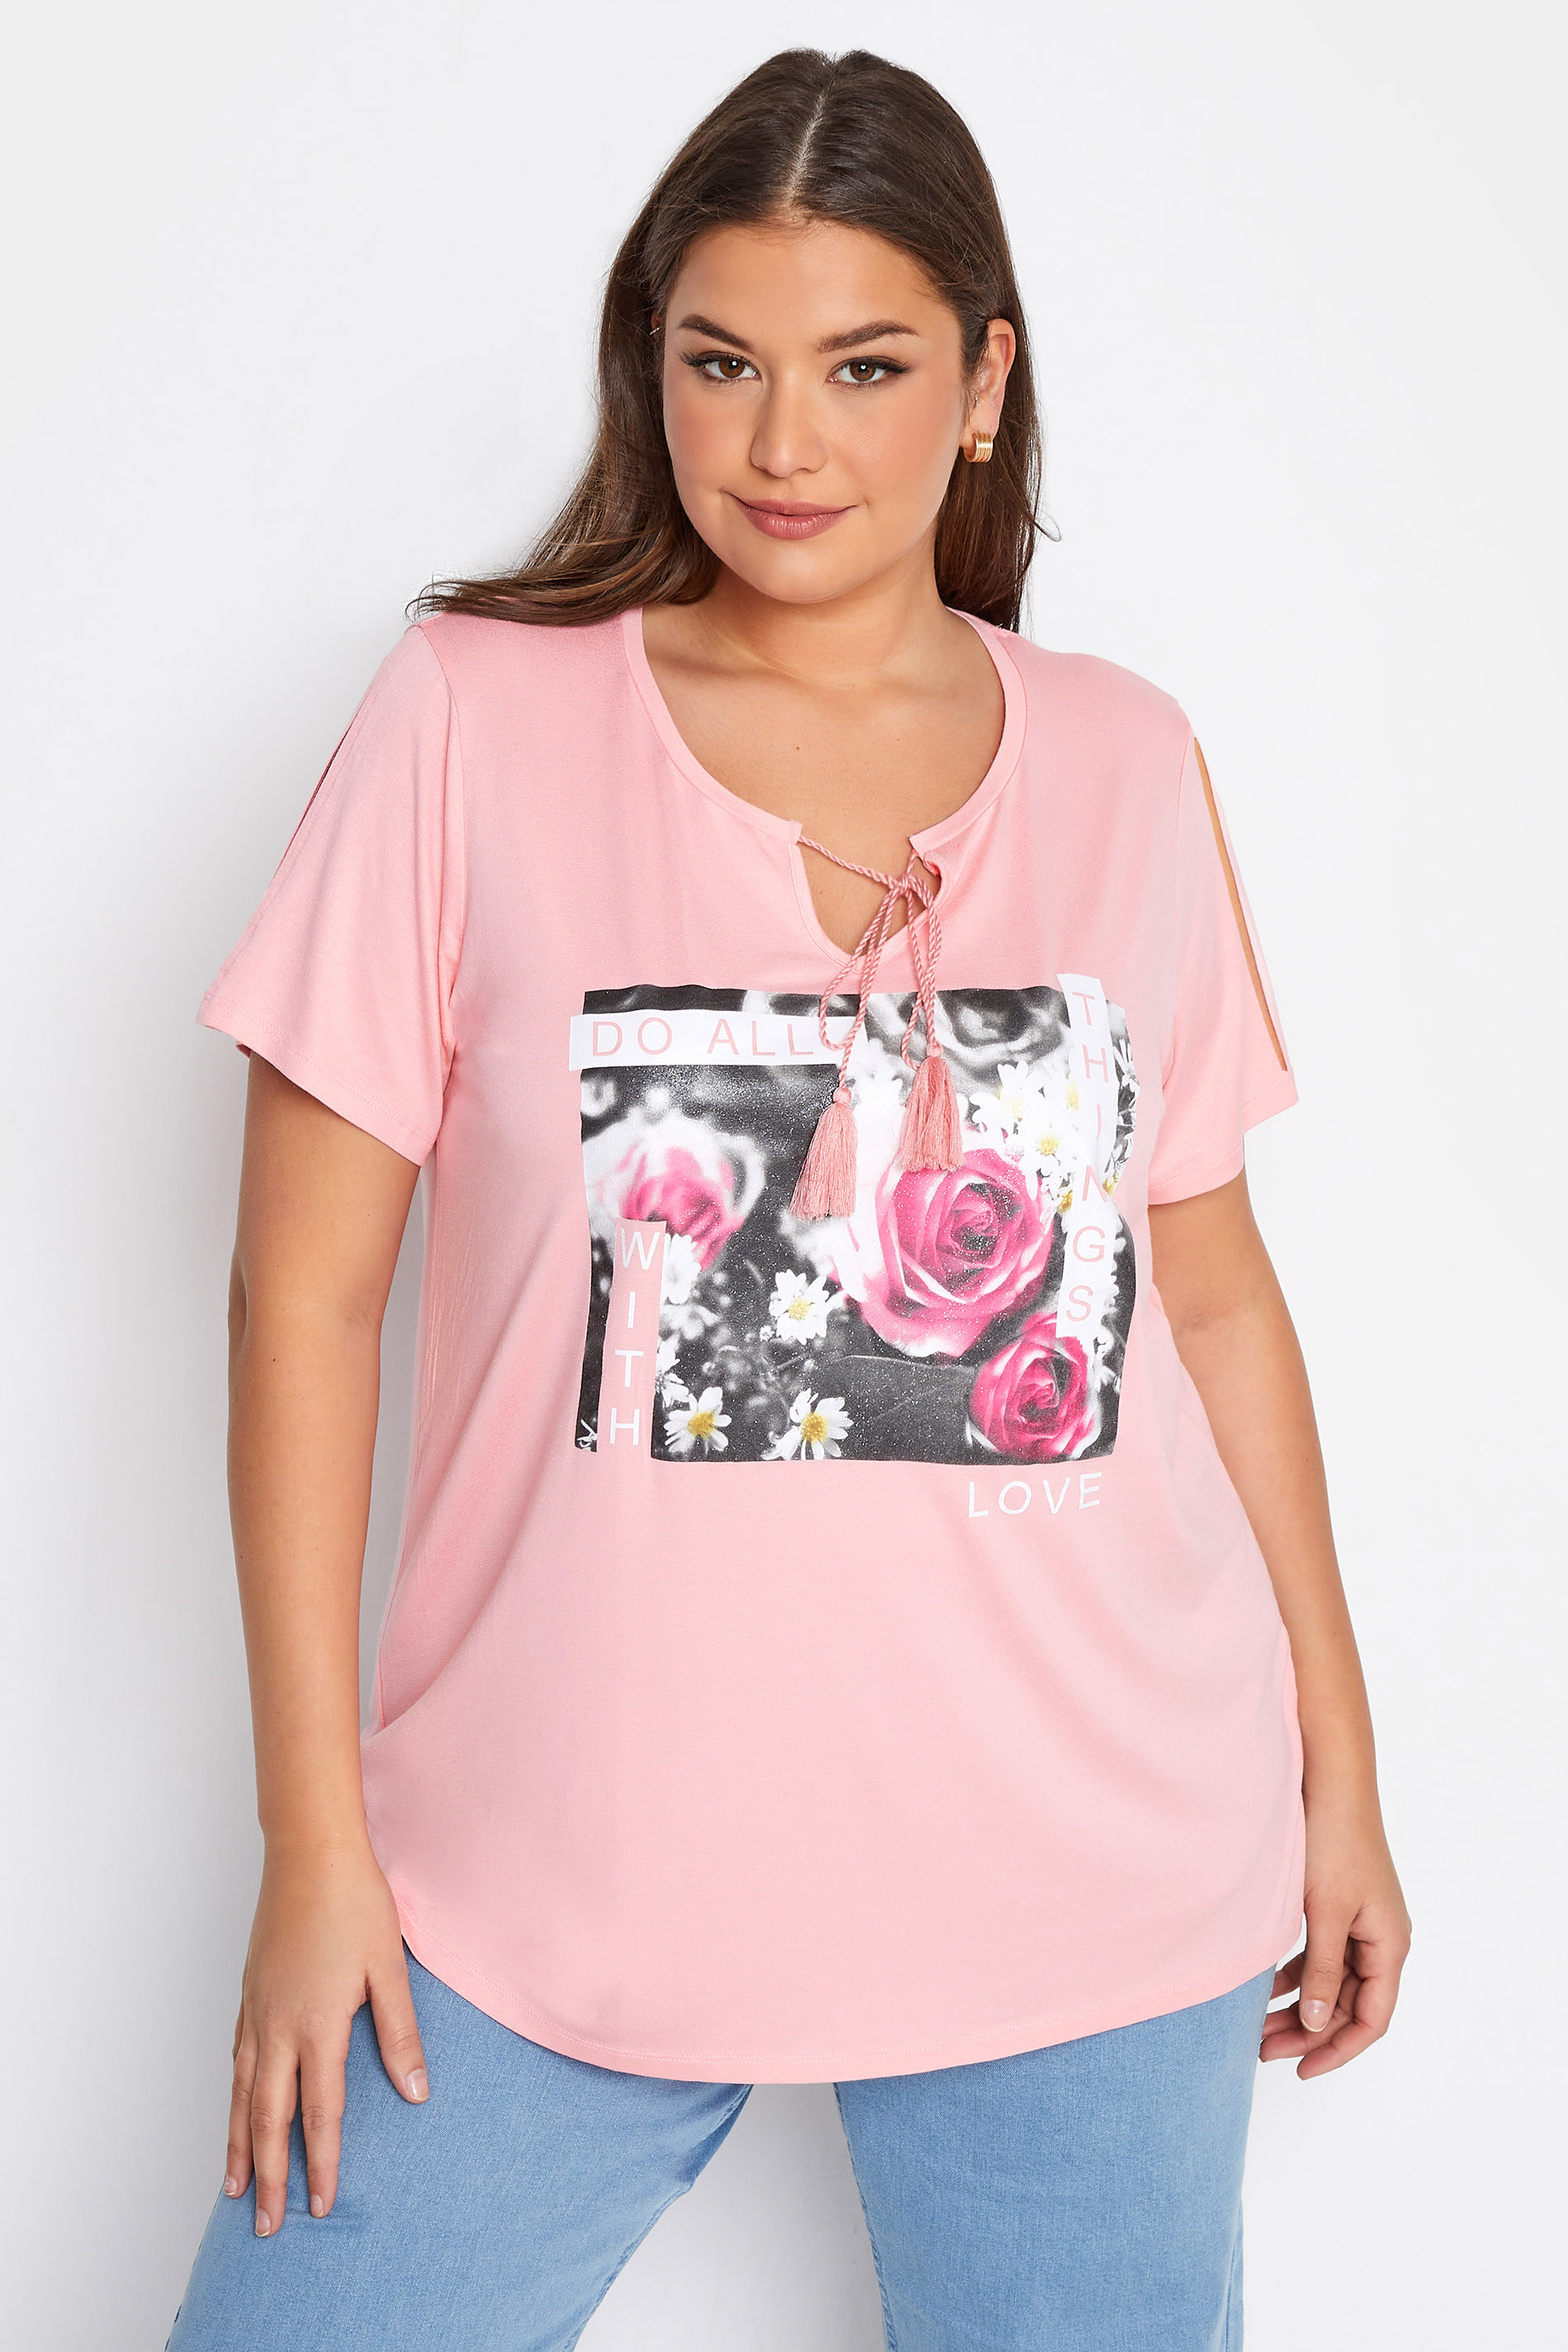 Grande taille  Tops Grande taille  T-Shirts | T-Shirt Rose Slogan 'All things with love' en Jersey - XH59056